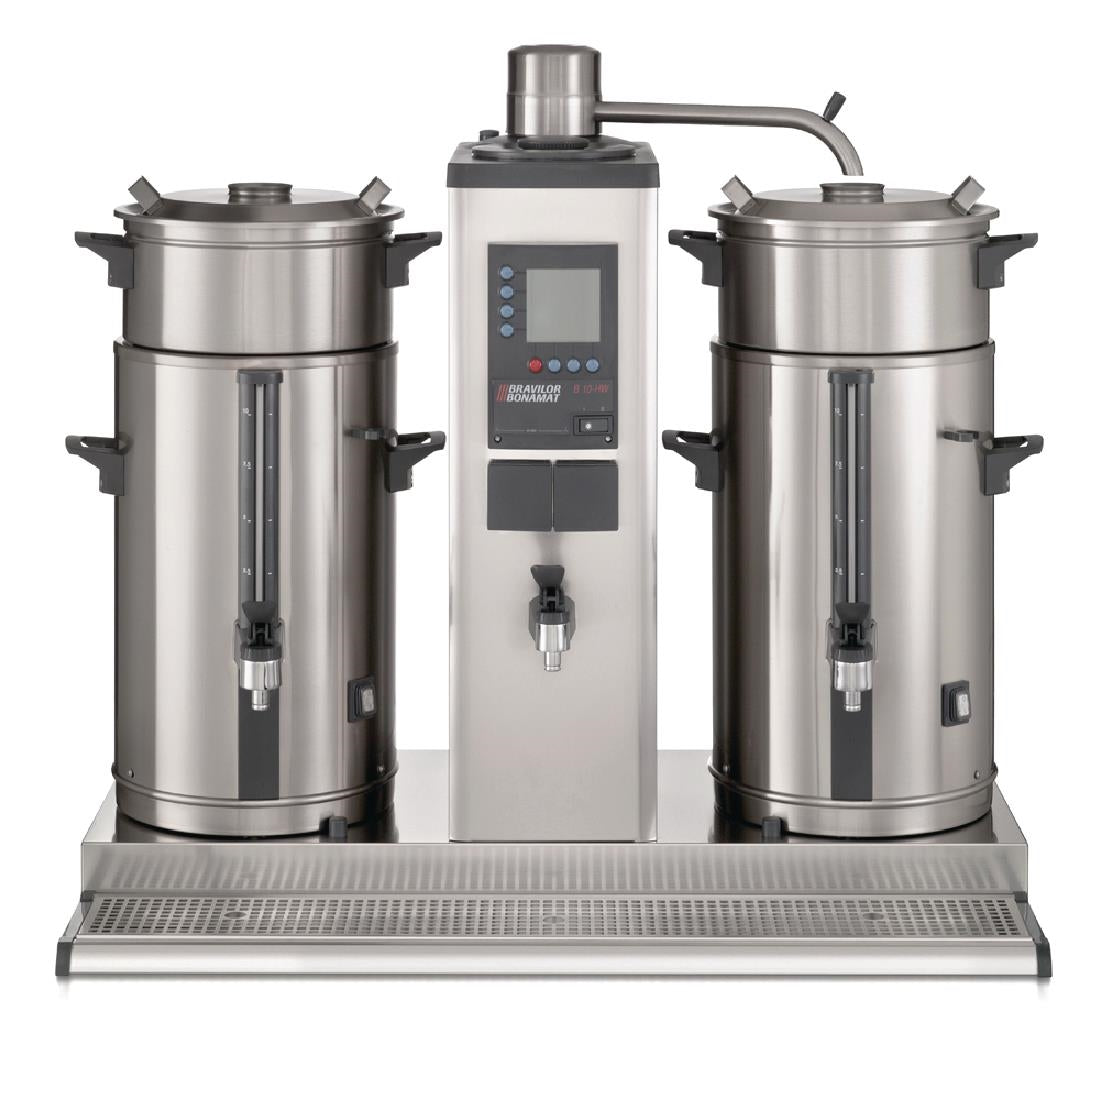 DC690-3P50 Bravilor B10 HW5 Bulk Coffee Brewer with 2x10Ltr Coffee Urns and Hot Water Tap 3 Phase JD Catering Equipment Solutions Ltd